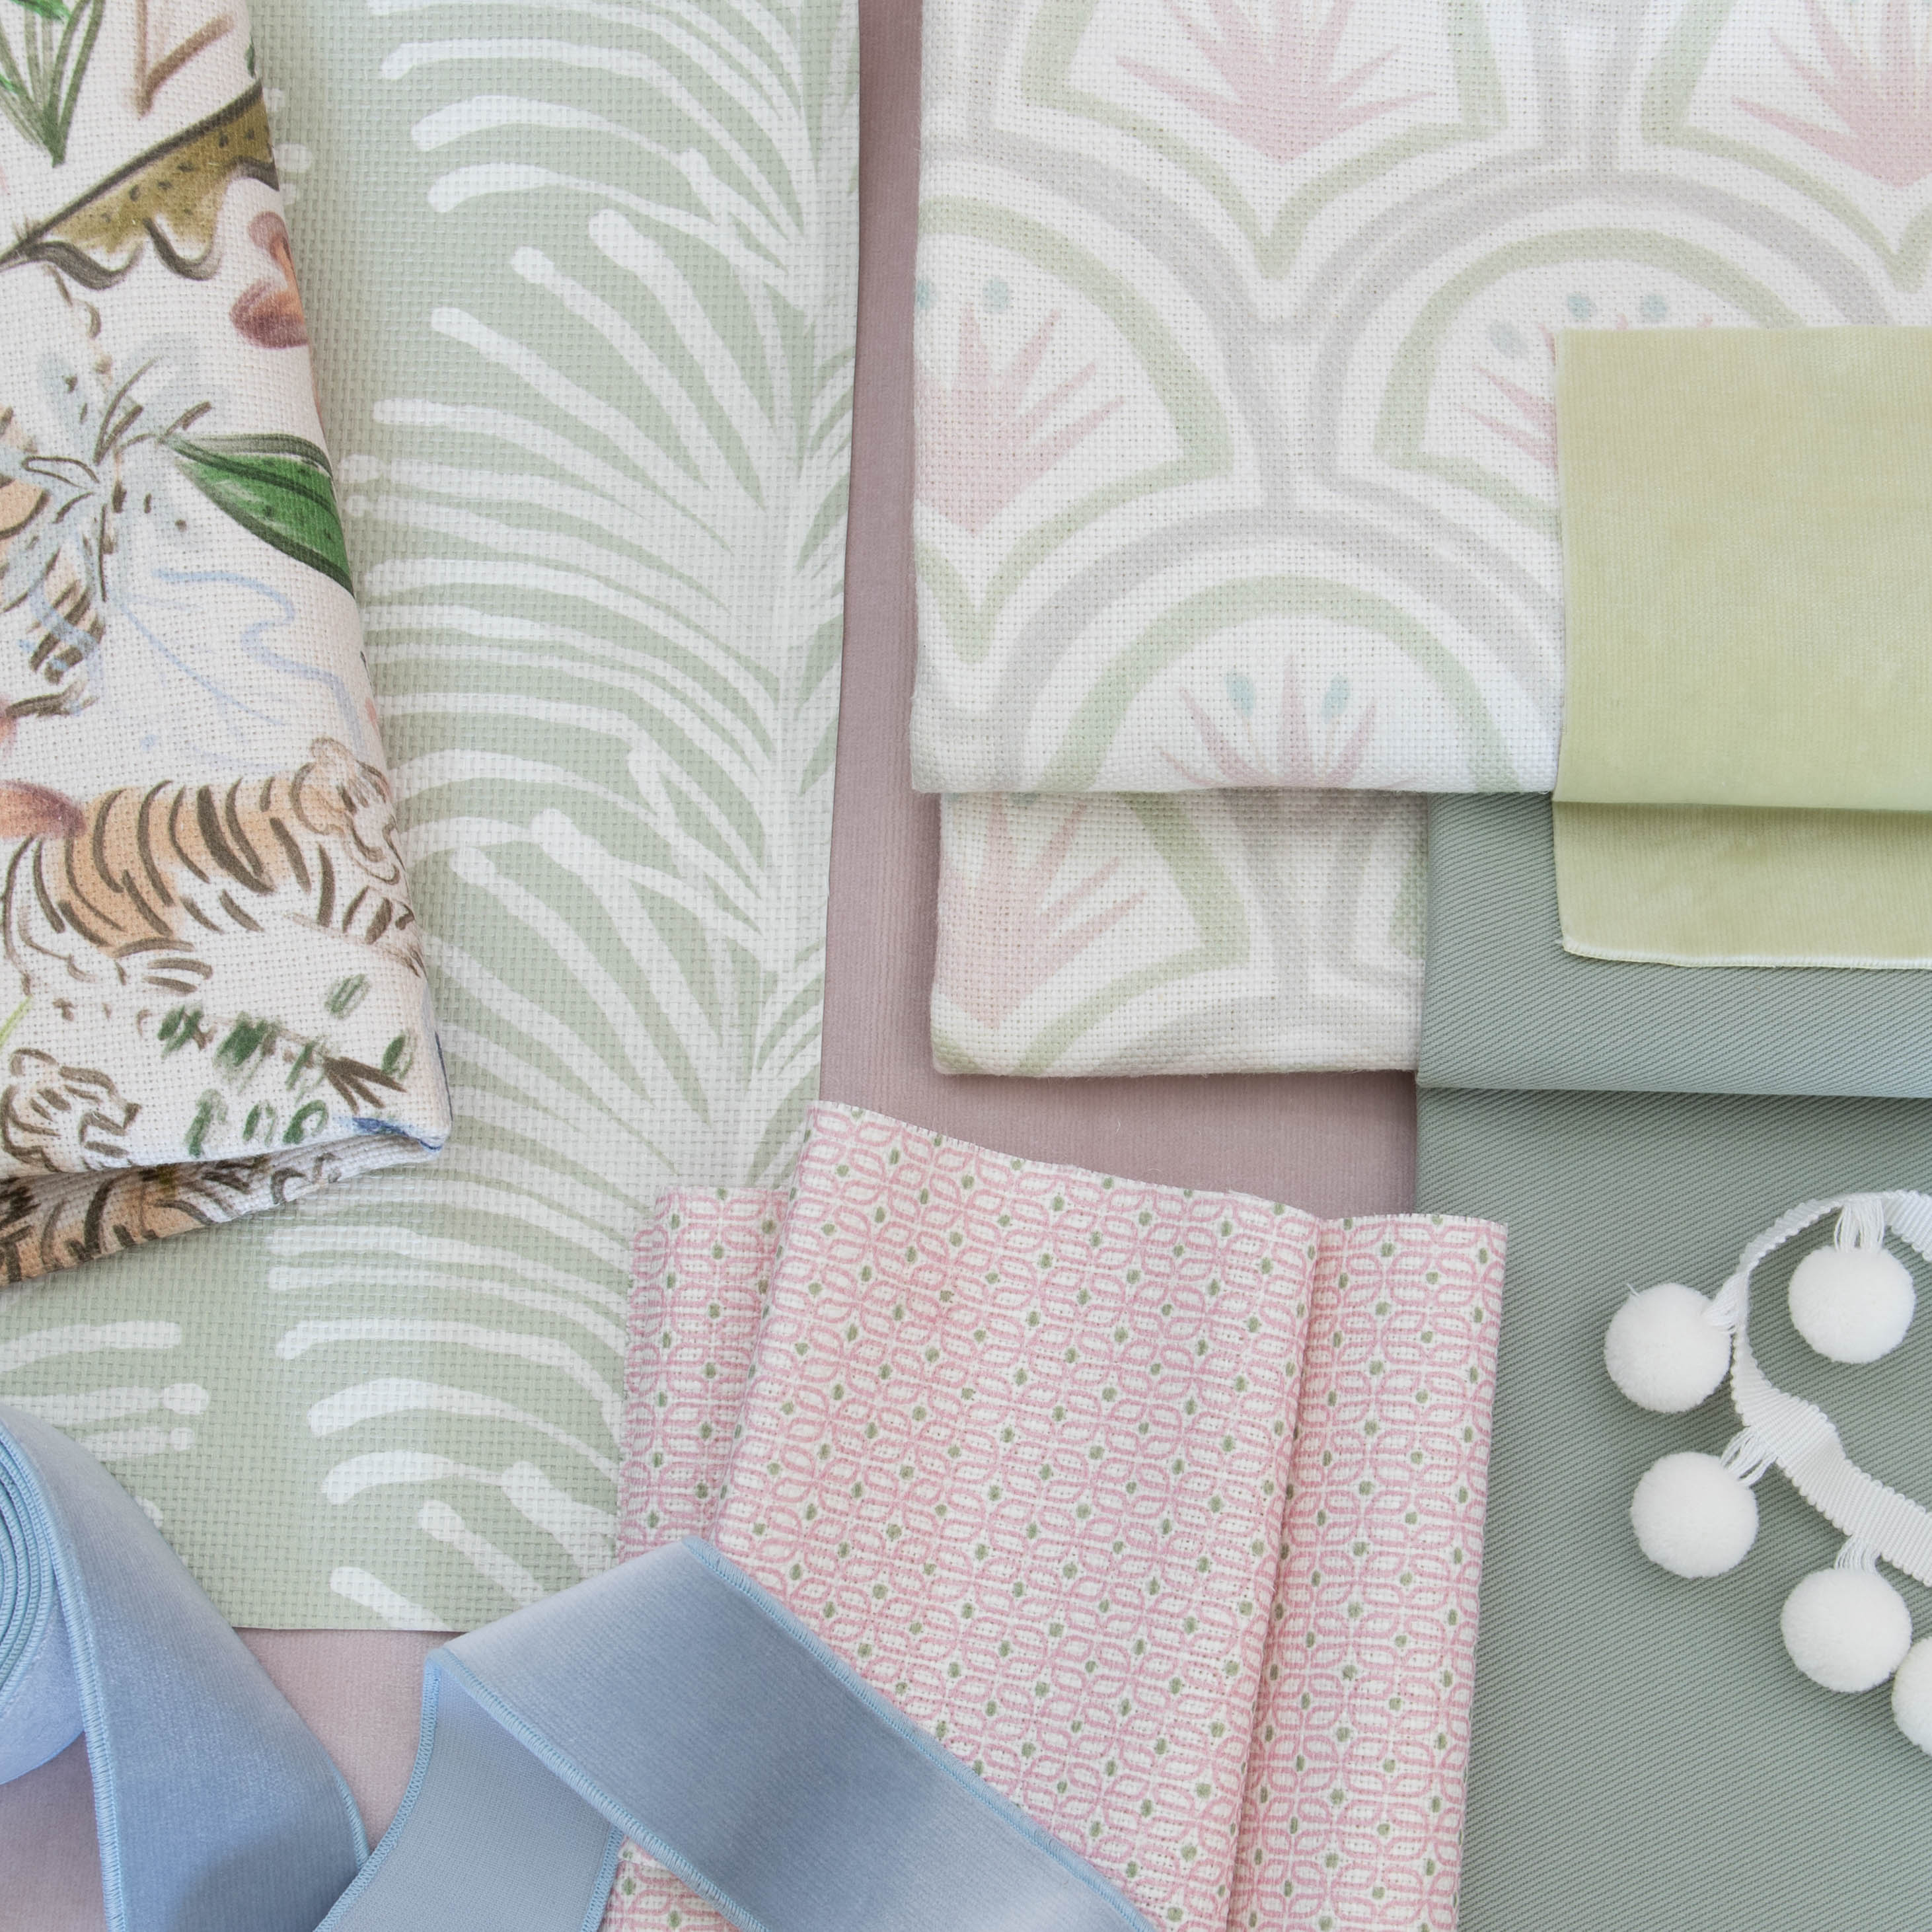 Interior design moodboard and fabric inspirations close-up with Pink Chinoiserie Tiger Printed Linen Swatch, Sage Green Printed Linen Swatch, Green Linen Swatch, and Pink Geometric Printed Linen Swatch